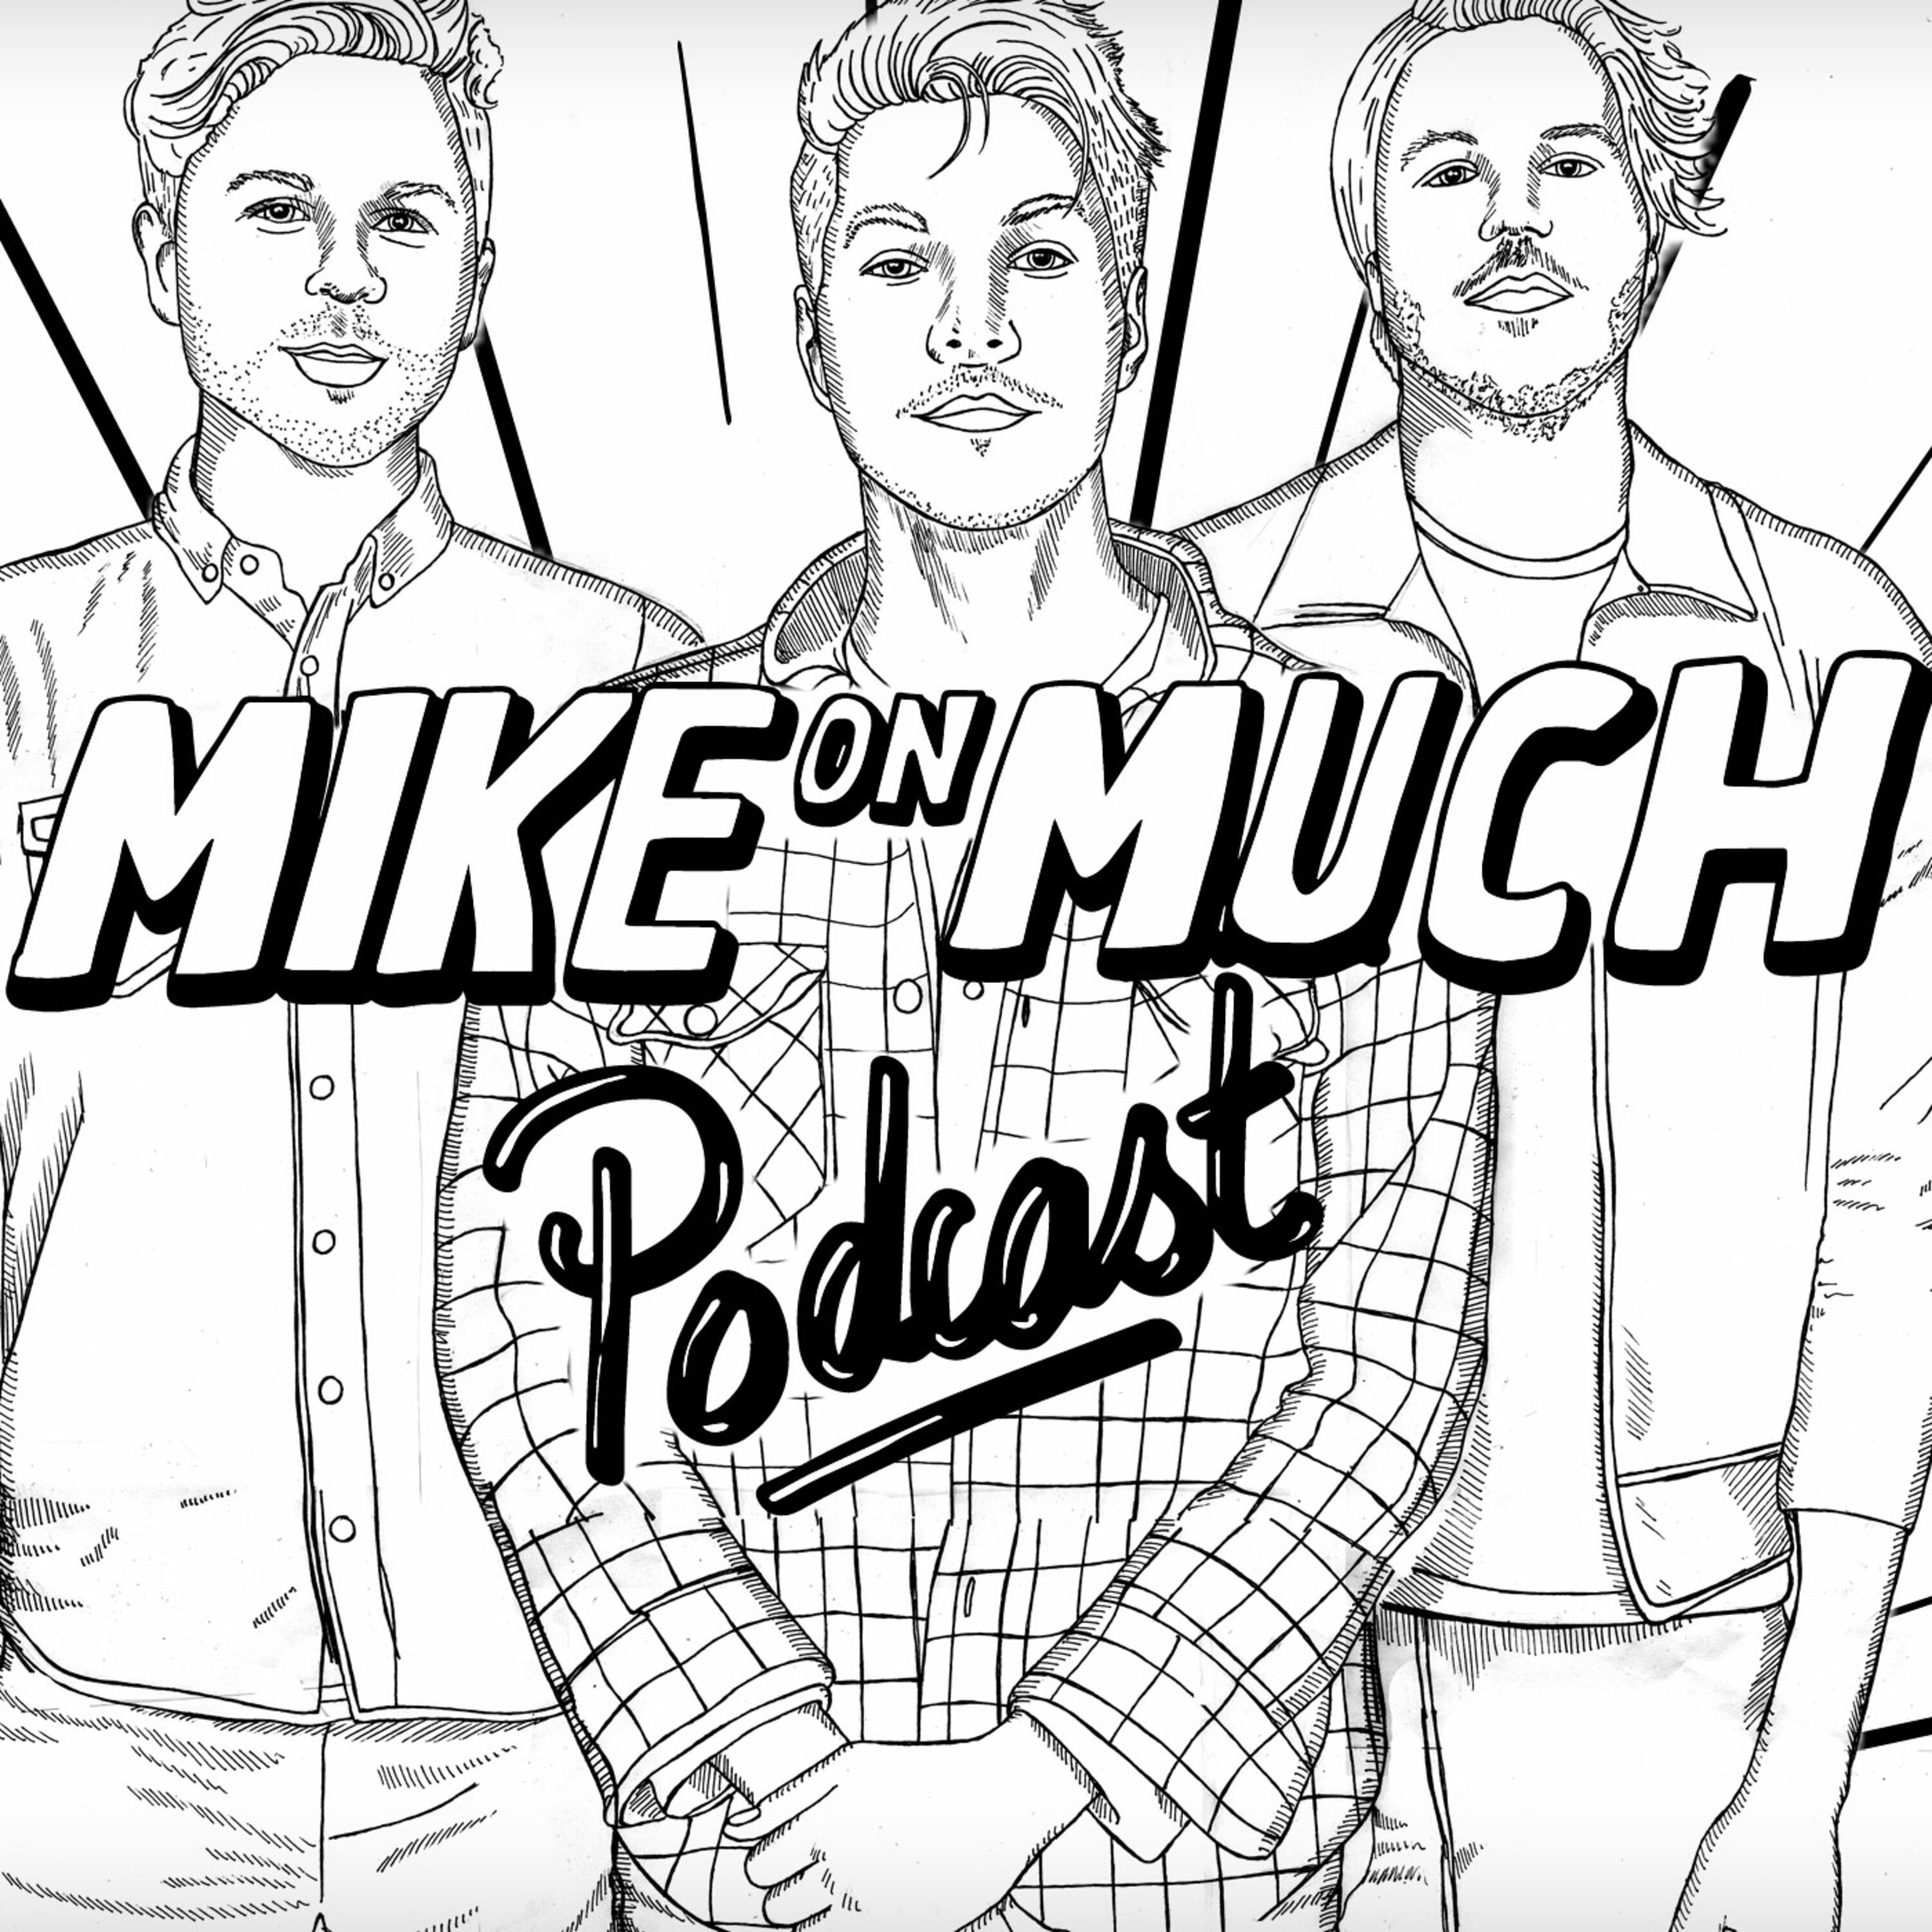 Season 1 Mike On Much: Live From The Bubble: Greg Veerman